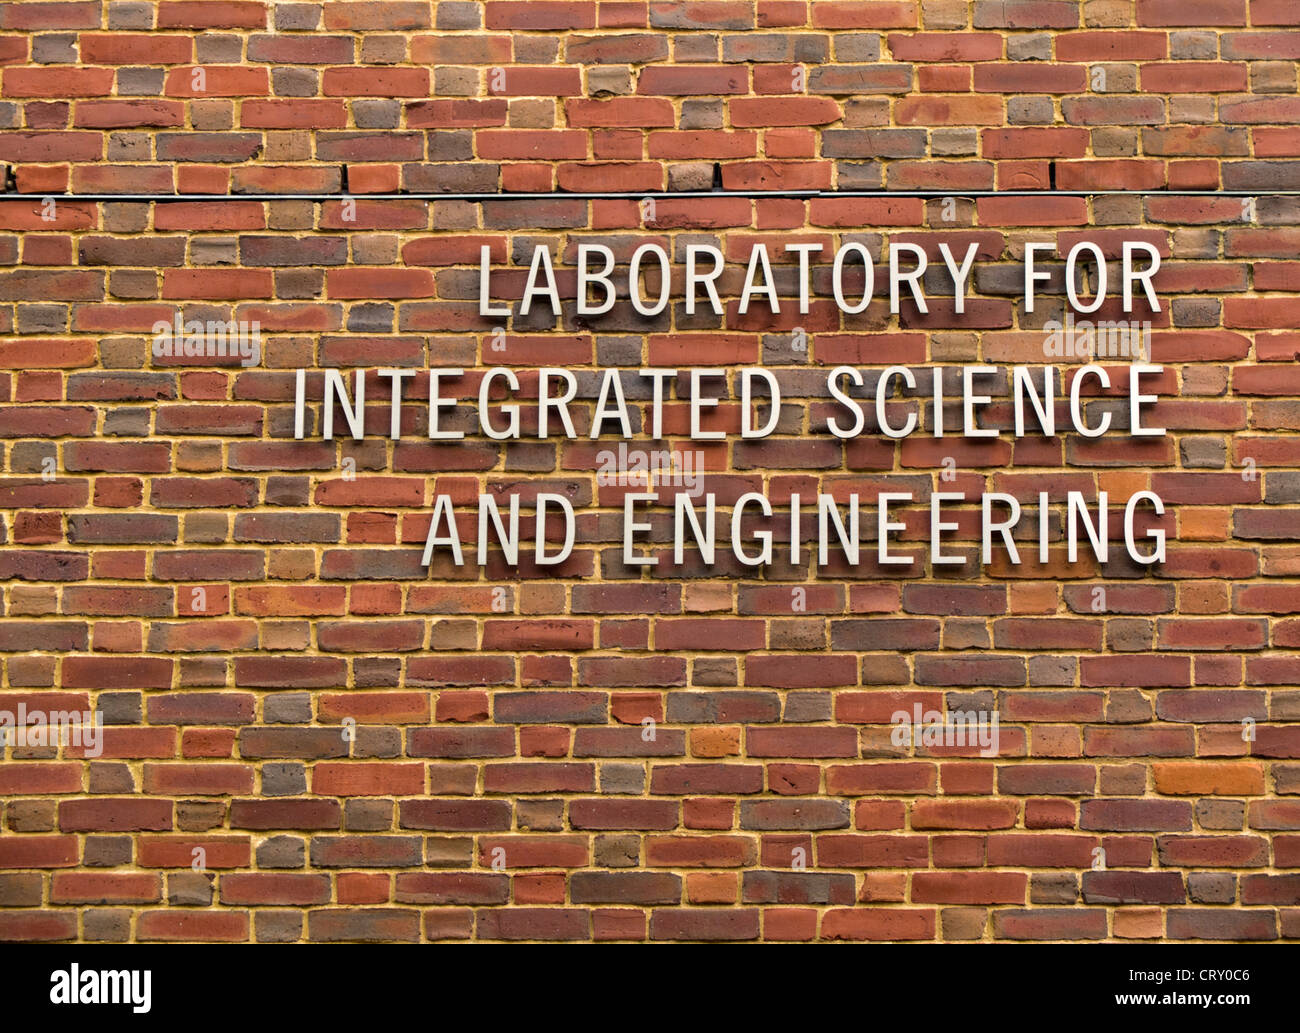 Laboratory for Integrated Science and Engineering at Harvard University Stock Photo